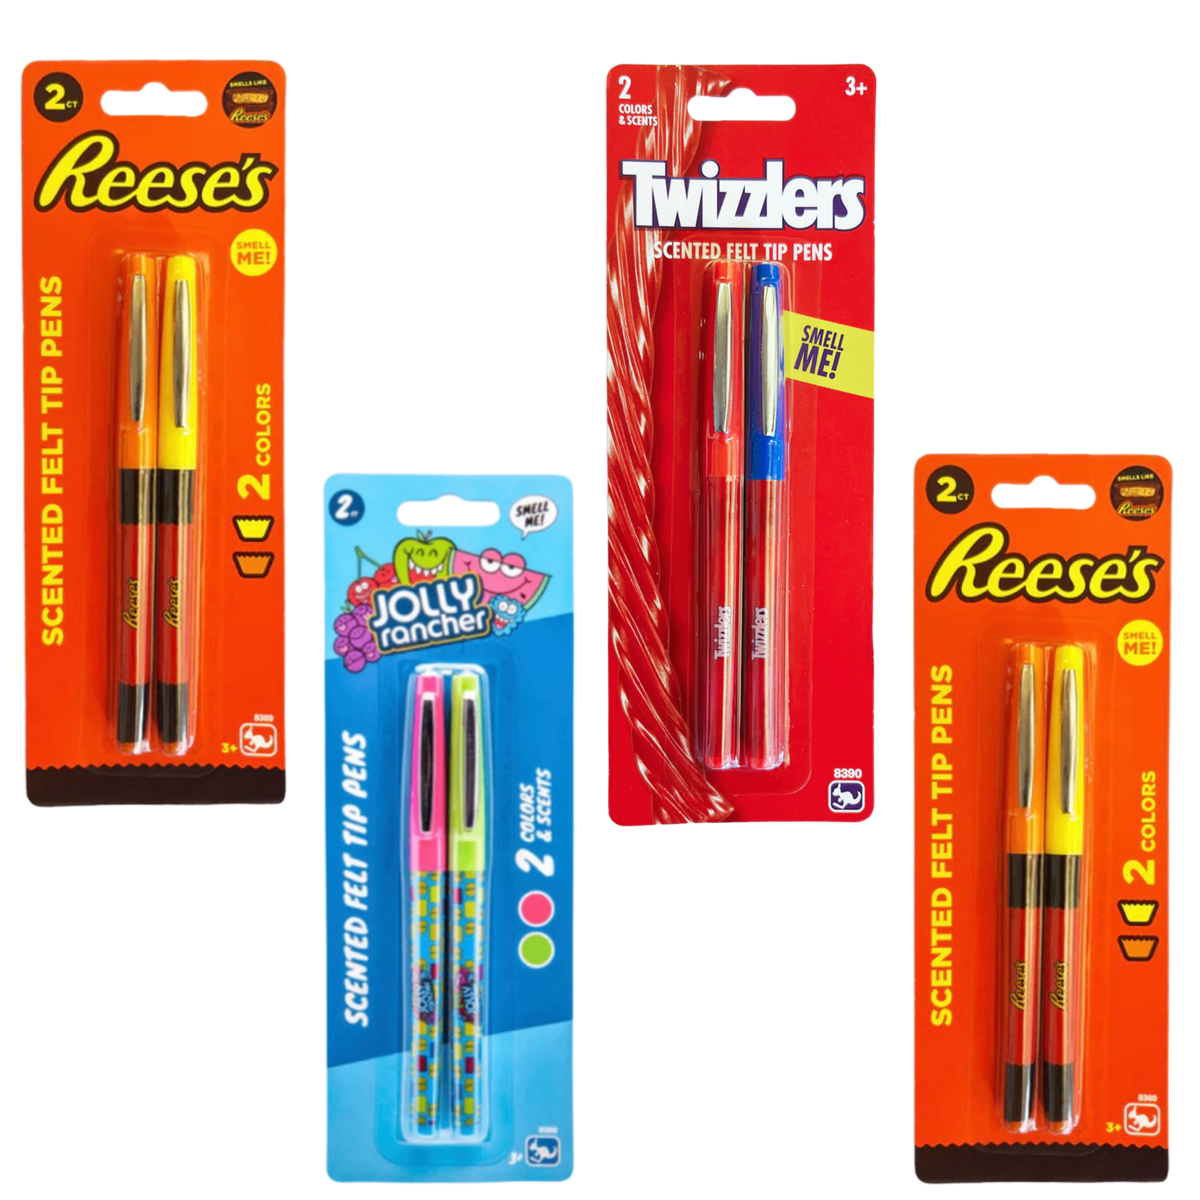 8pk Scented Felt Tip Pens - Reeses, Jolly Rancher & Twizzlers